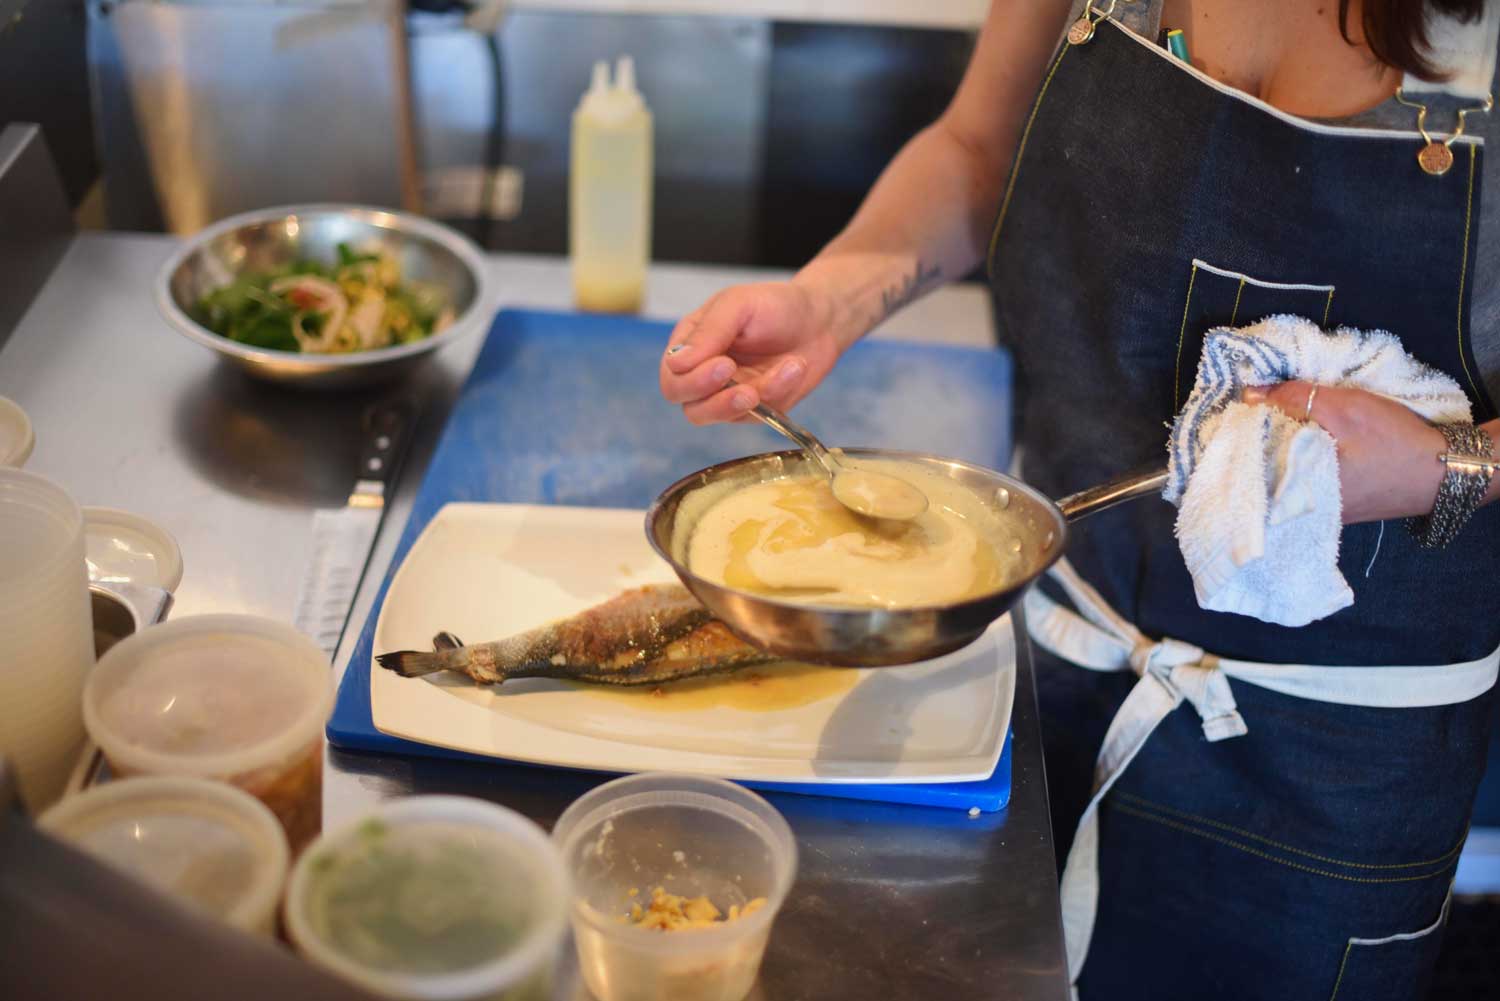 Chef Melissa spoons a butter sauce onto the pan seared fish.